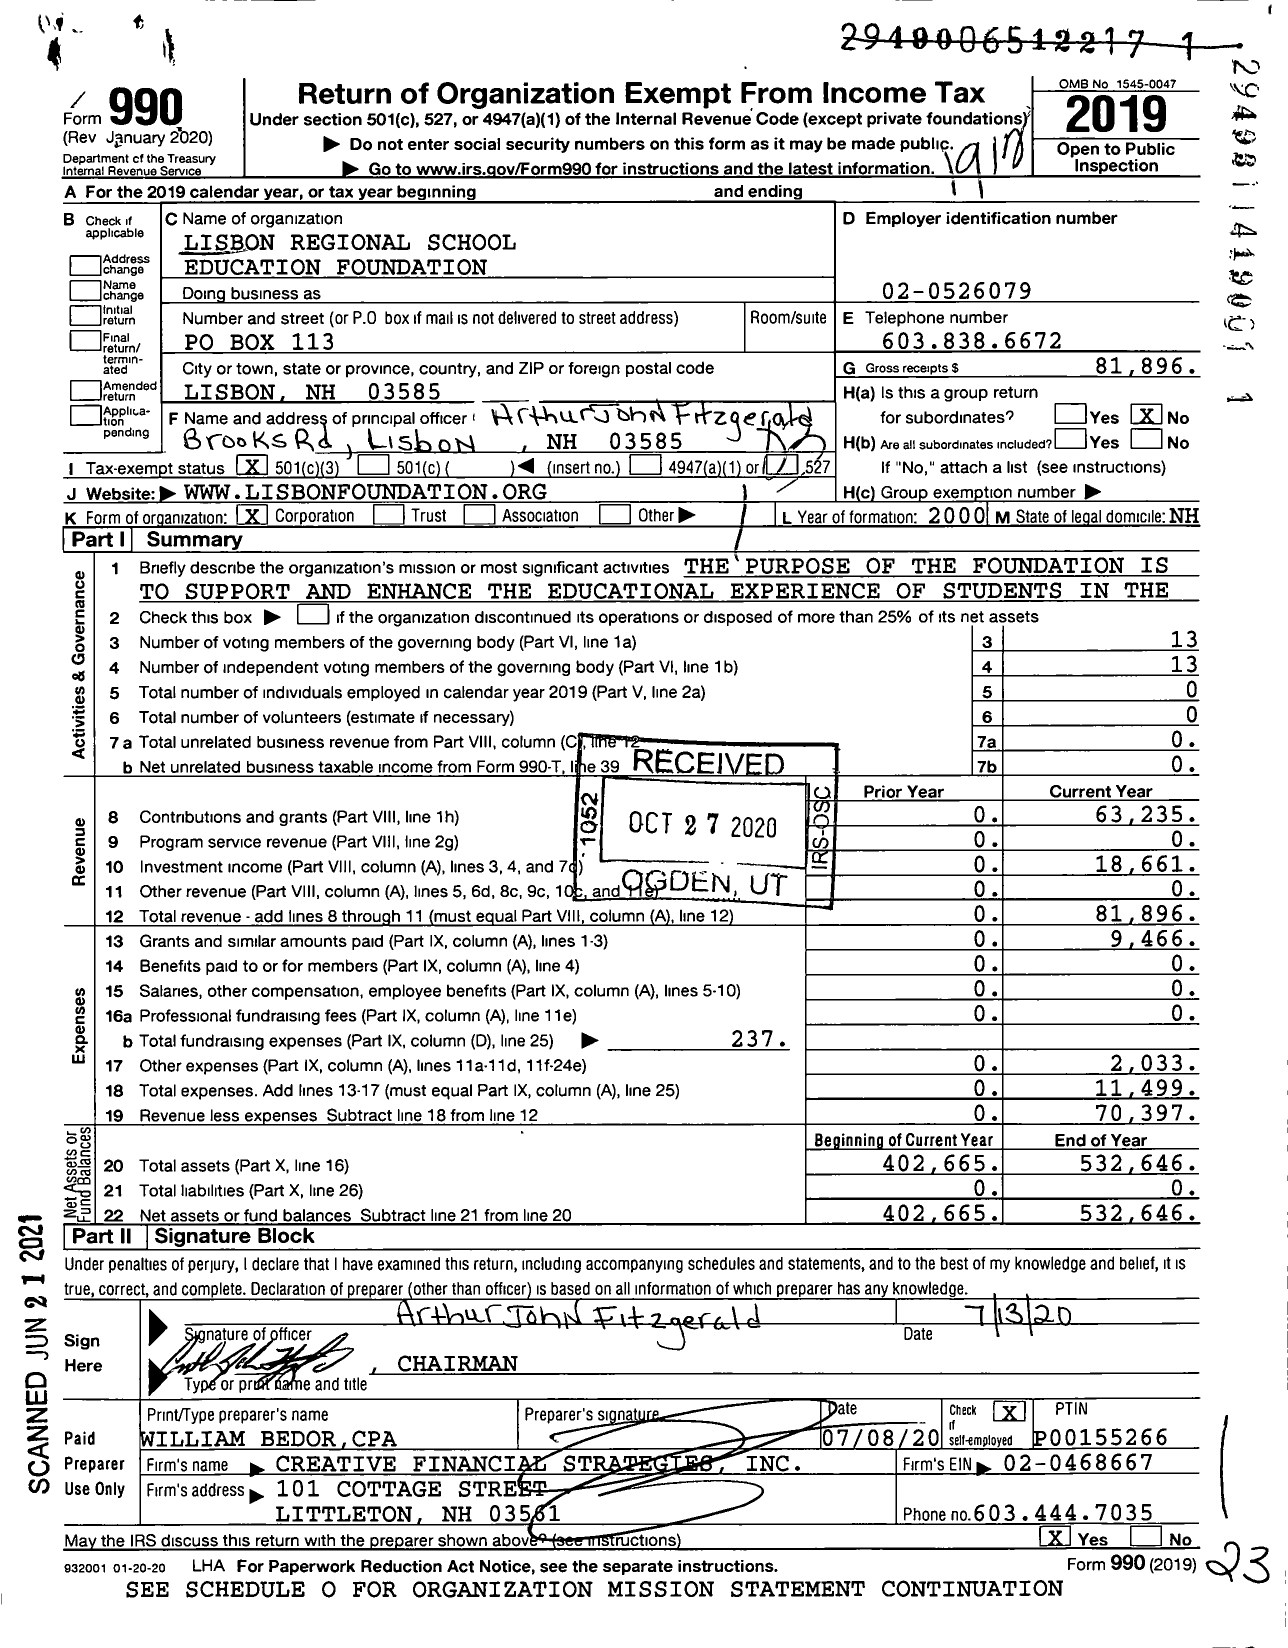 Image of first page of 2019 Form 990 for Lisbon Regional School Education Foundation